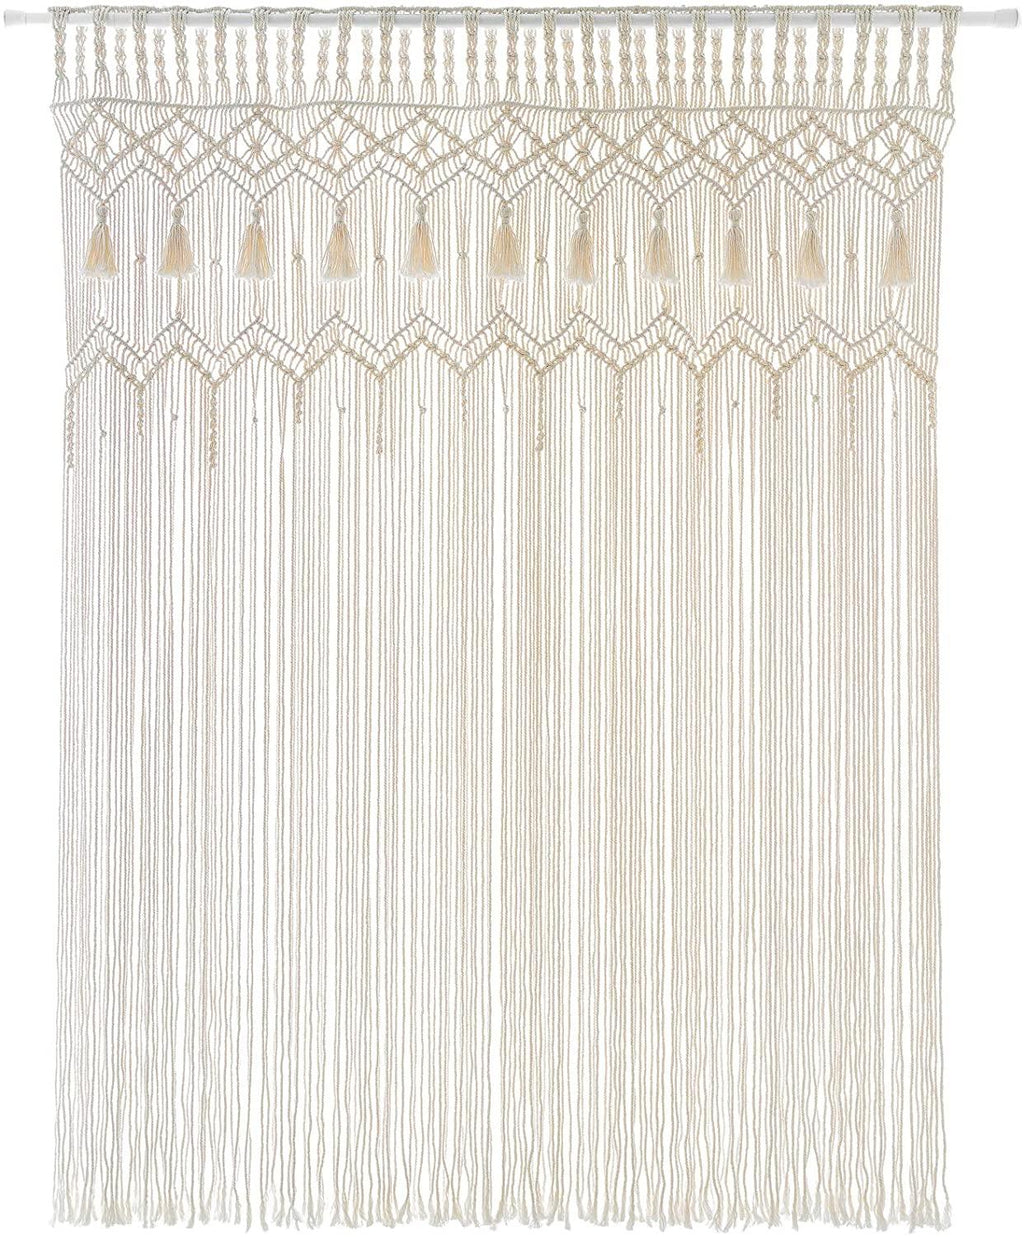 Macrame Curtain Large Boho Woven Wall Hanging Window Curtains - Decotree.co Online Shop